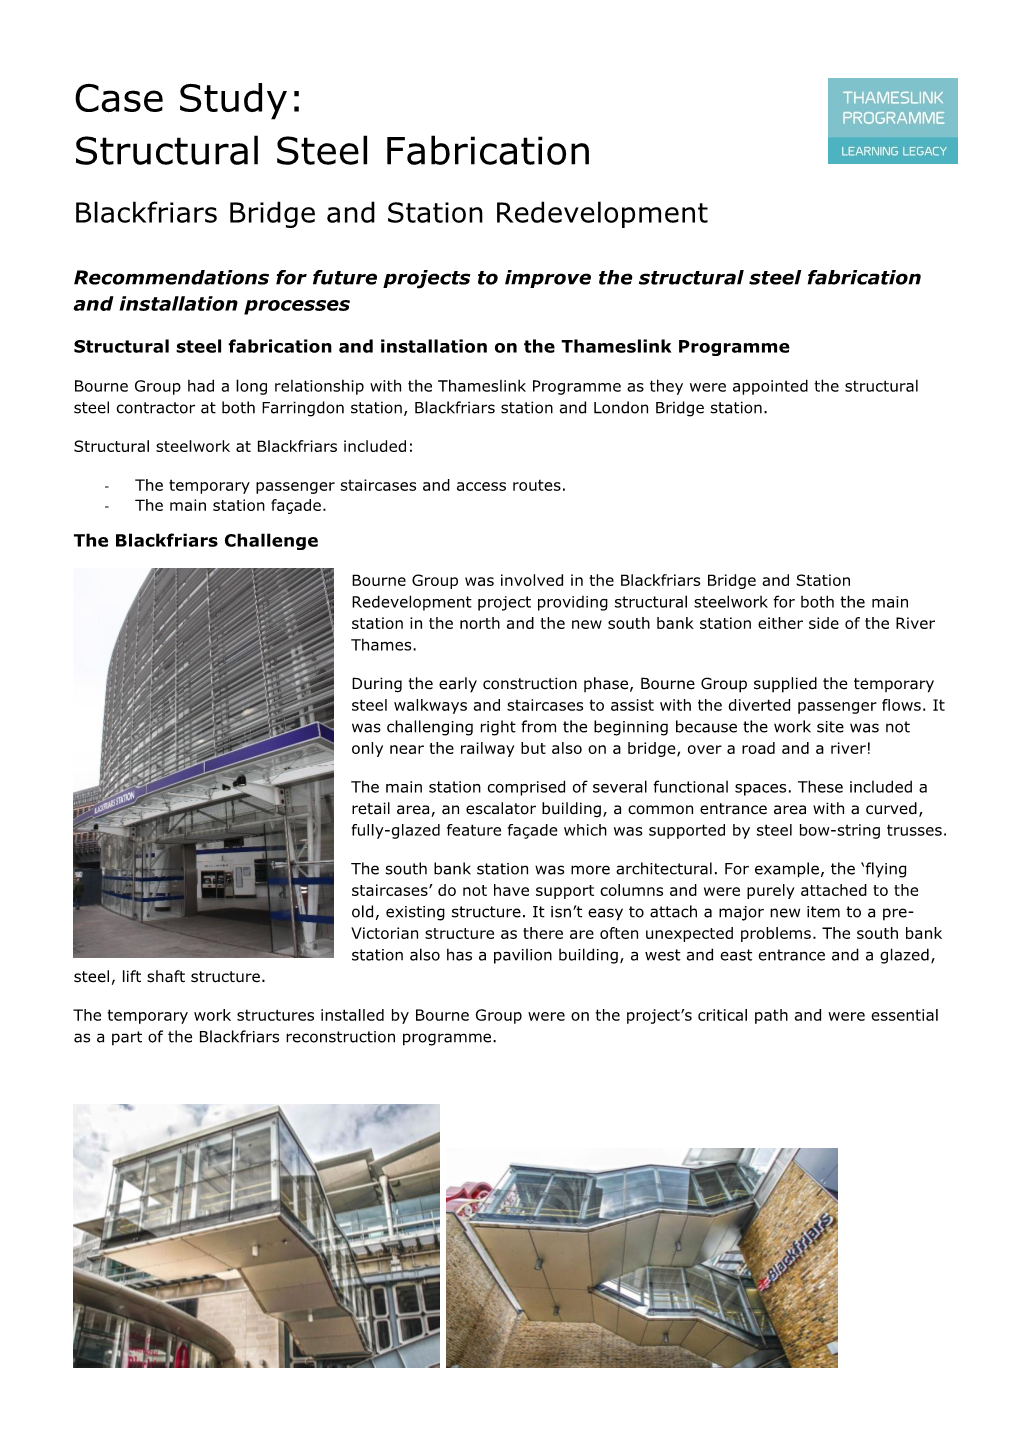 Case Study: Structural Steel Fabrication